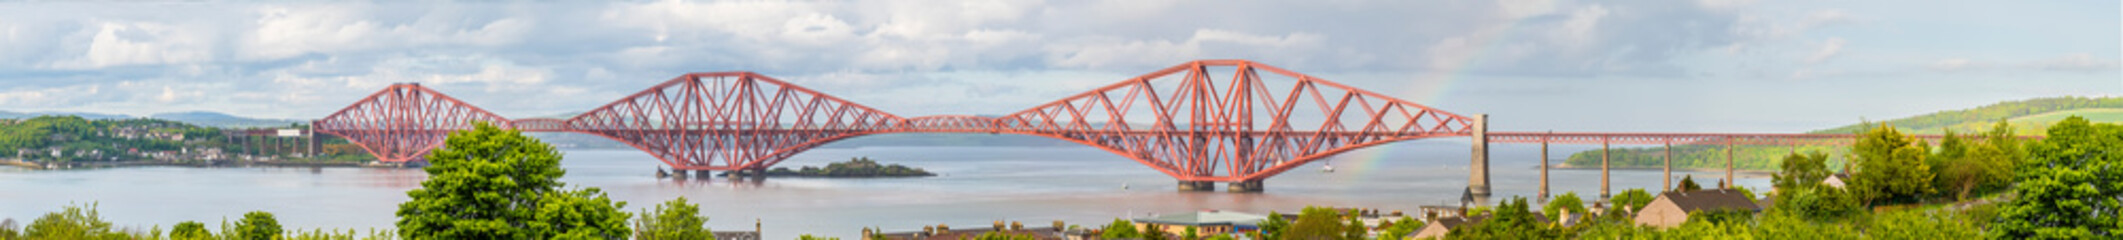 A panorama view of the Railway bridge over the Firth of Forth, Scotland on a summers day